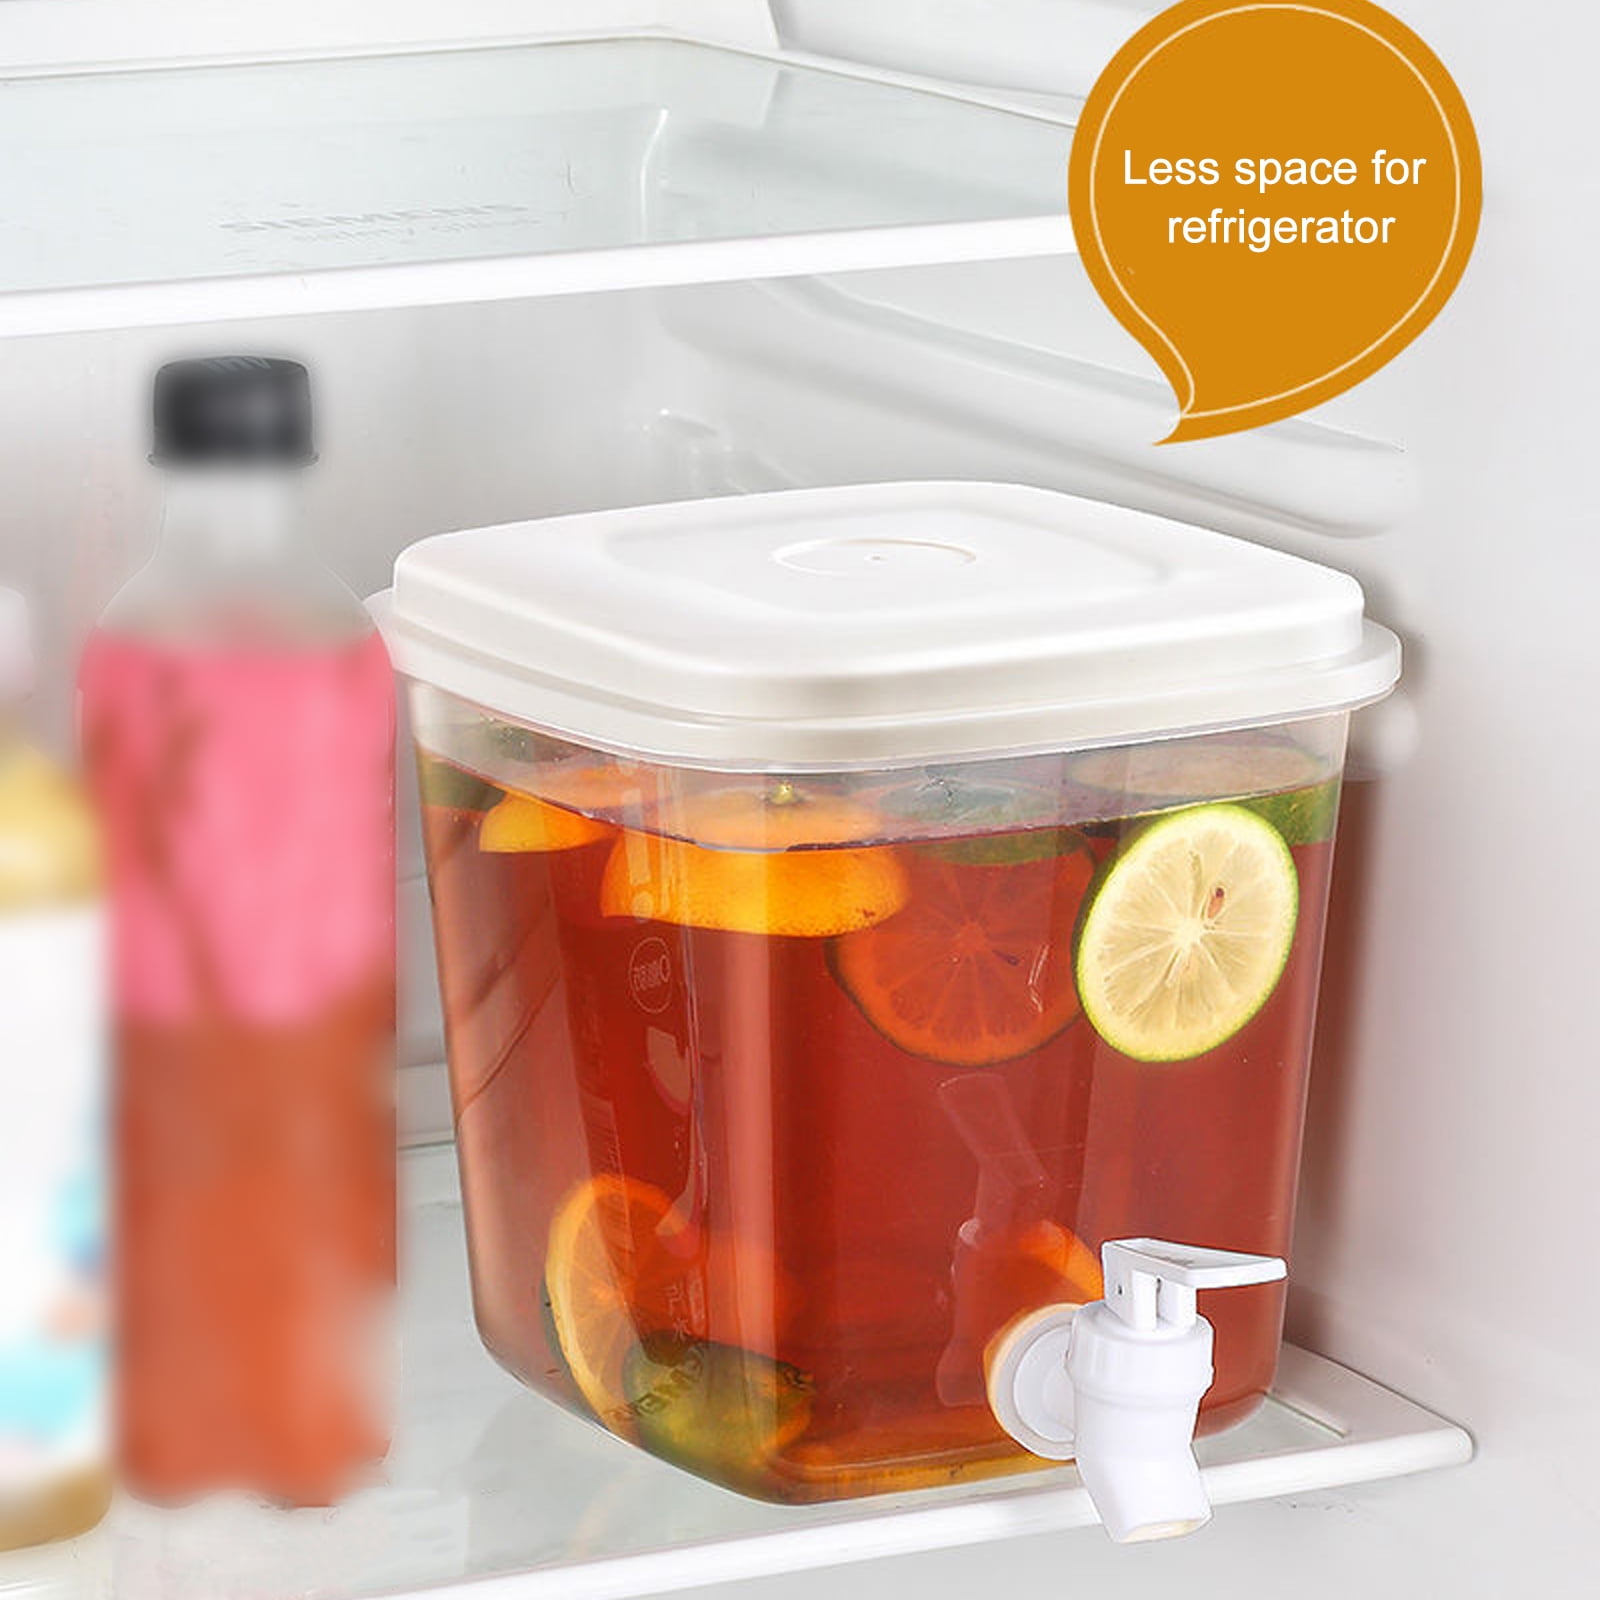 tongli 0.9 Gallon Drink Dispenser for Fridge,Beverage Dispenser with  Spigot. Milk,Lemonade Dispenser,Juice Containers with Lids for Fridge,  Parties and Dairly Use，100% Sealed and Filter Screen 